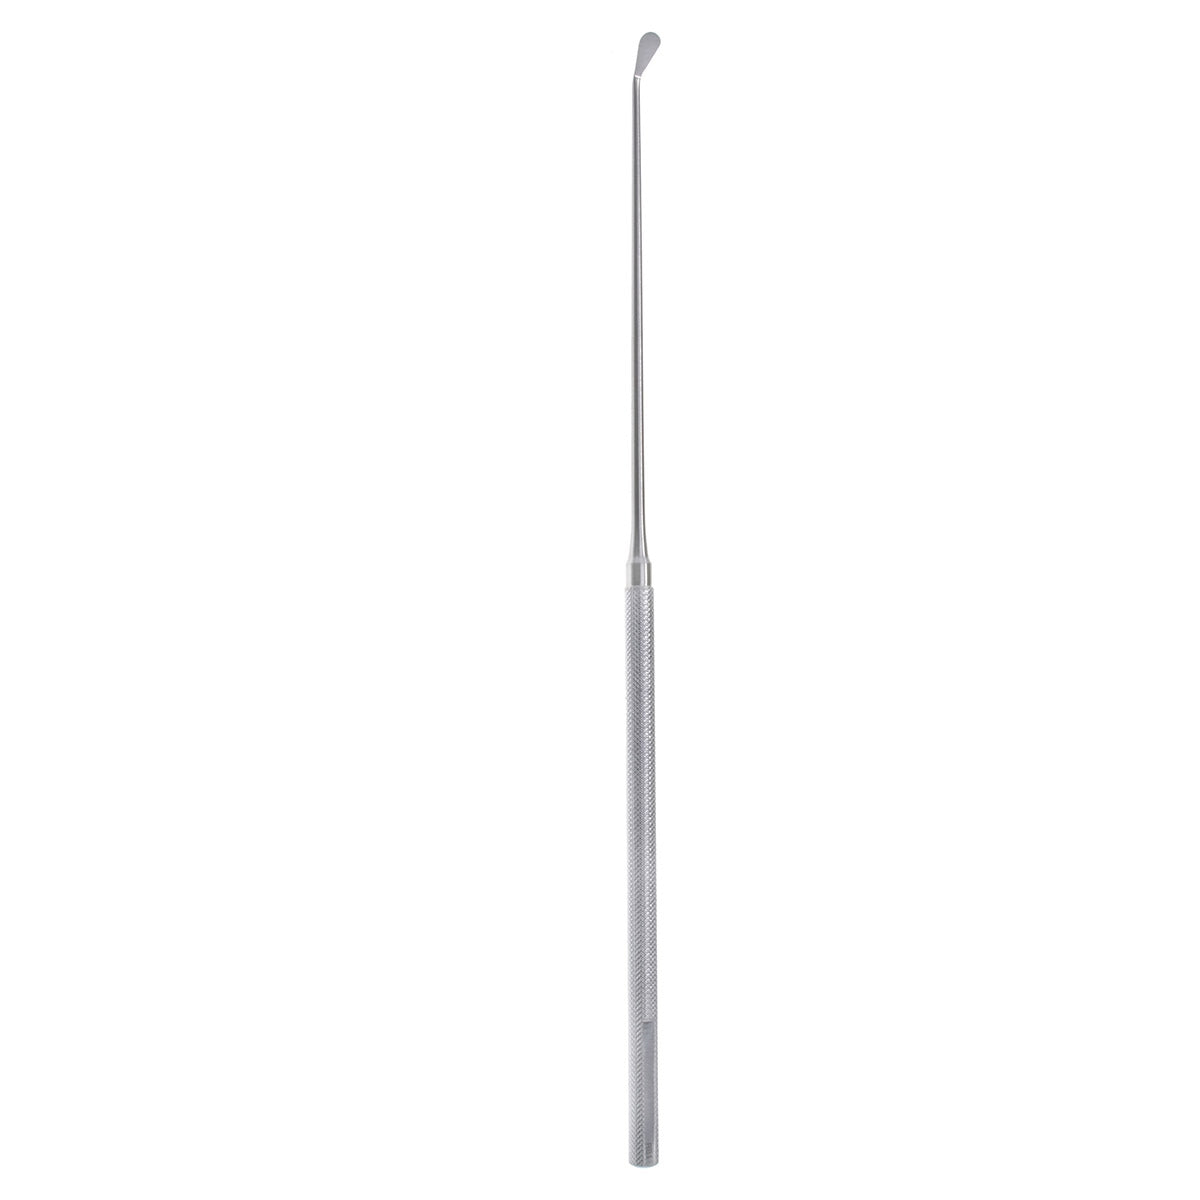 7 1/4 Yasargil Micro Dissector  straight handle angled round